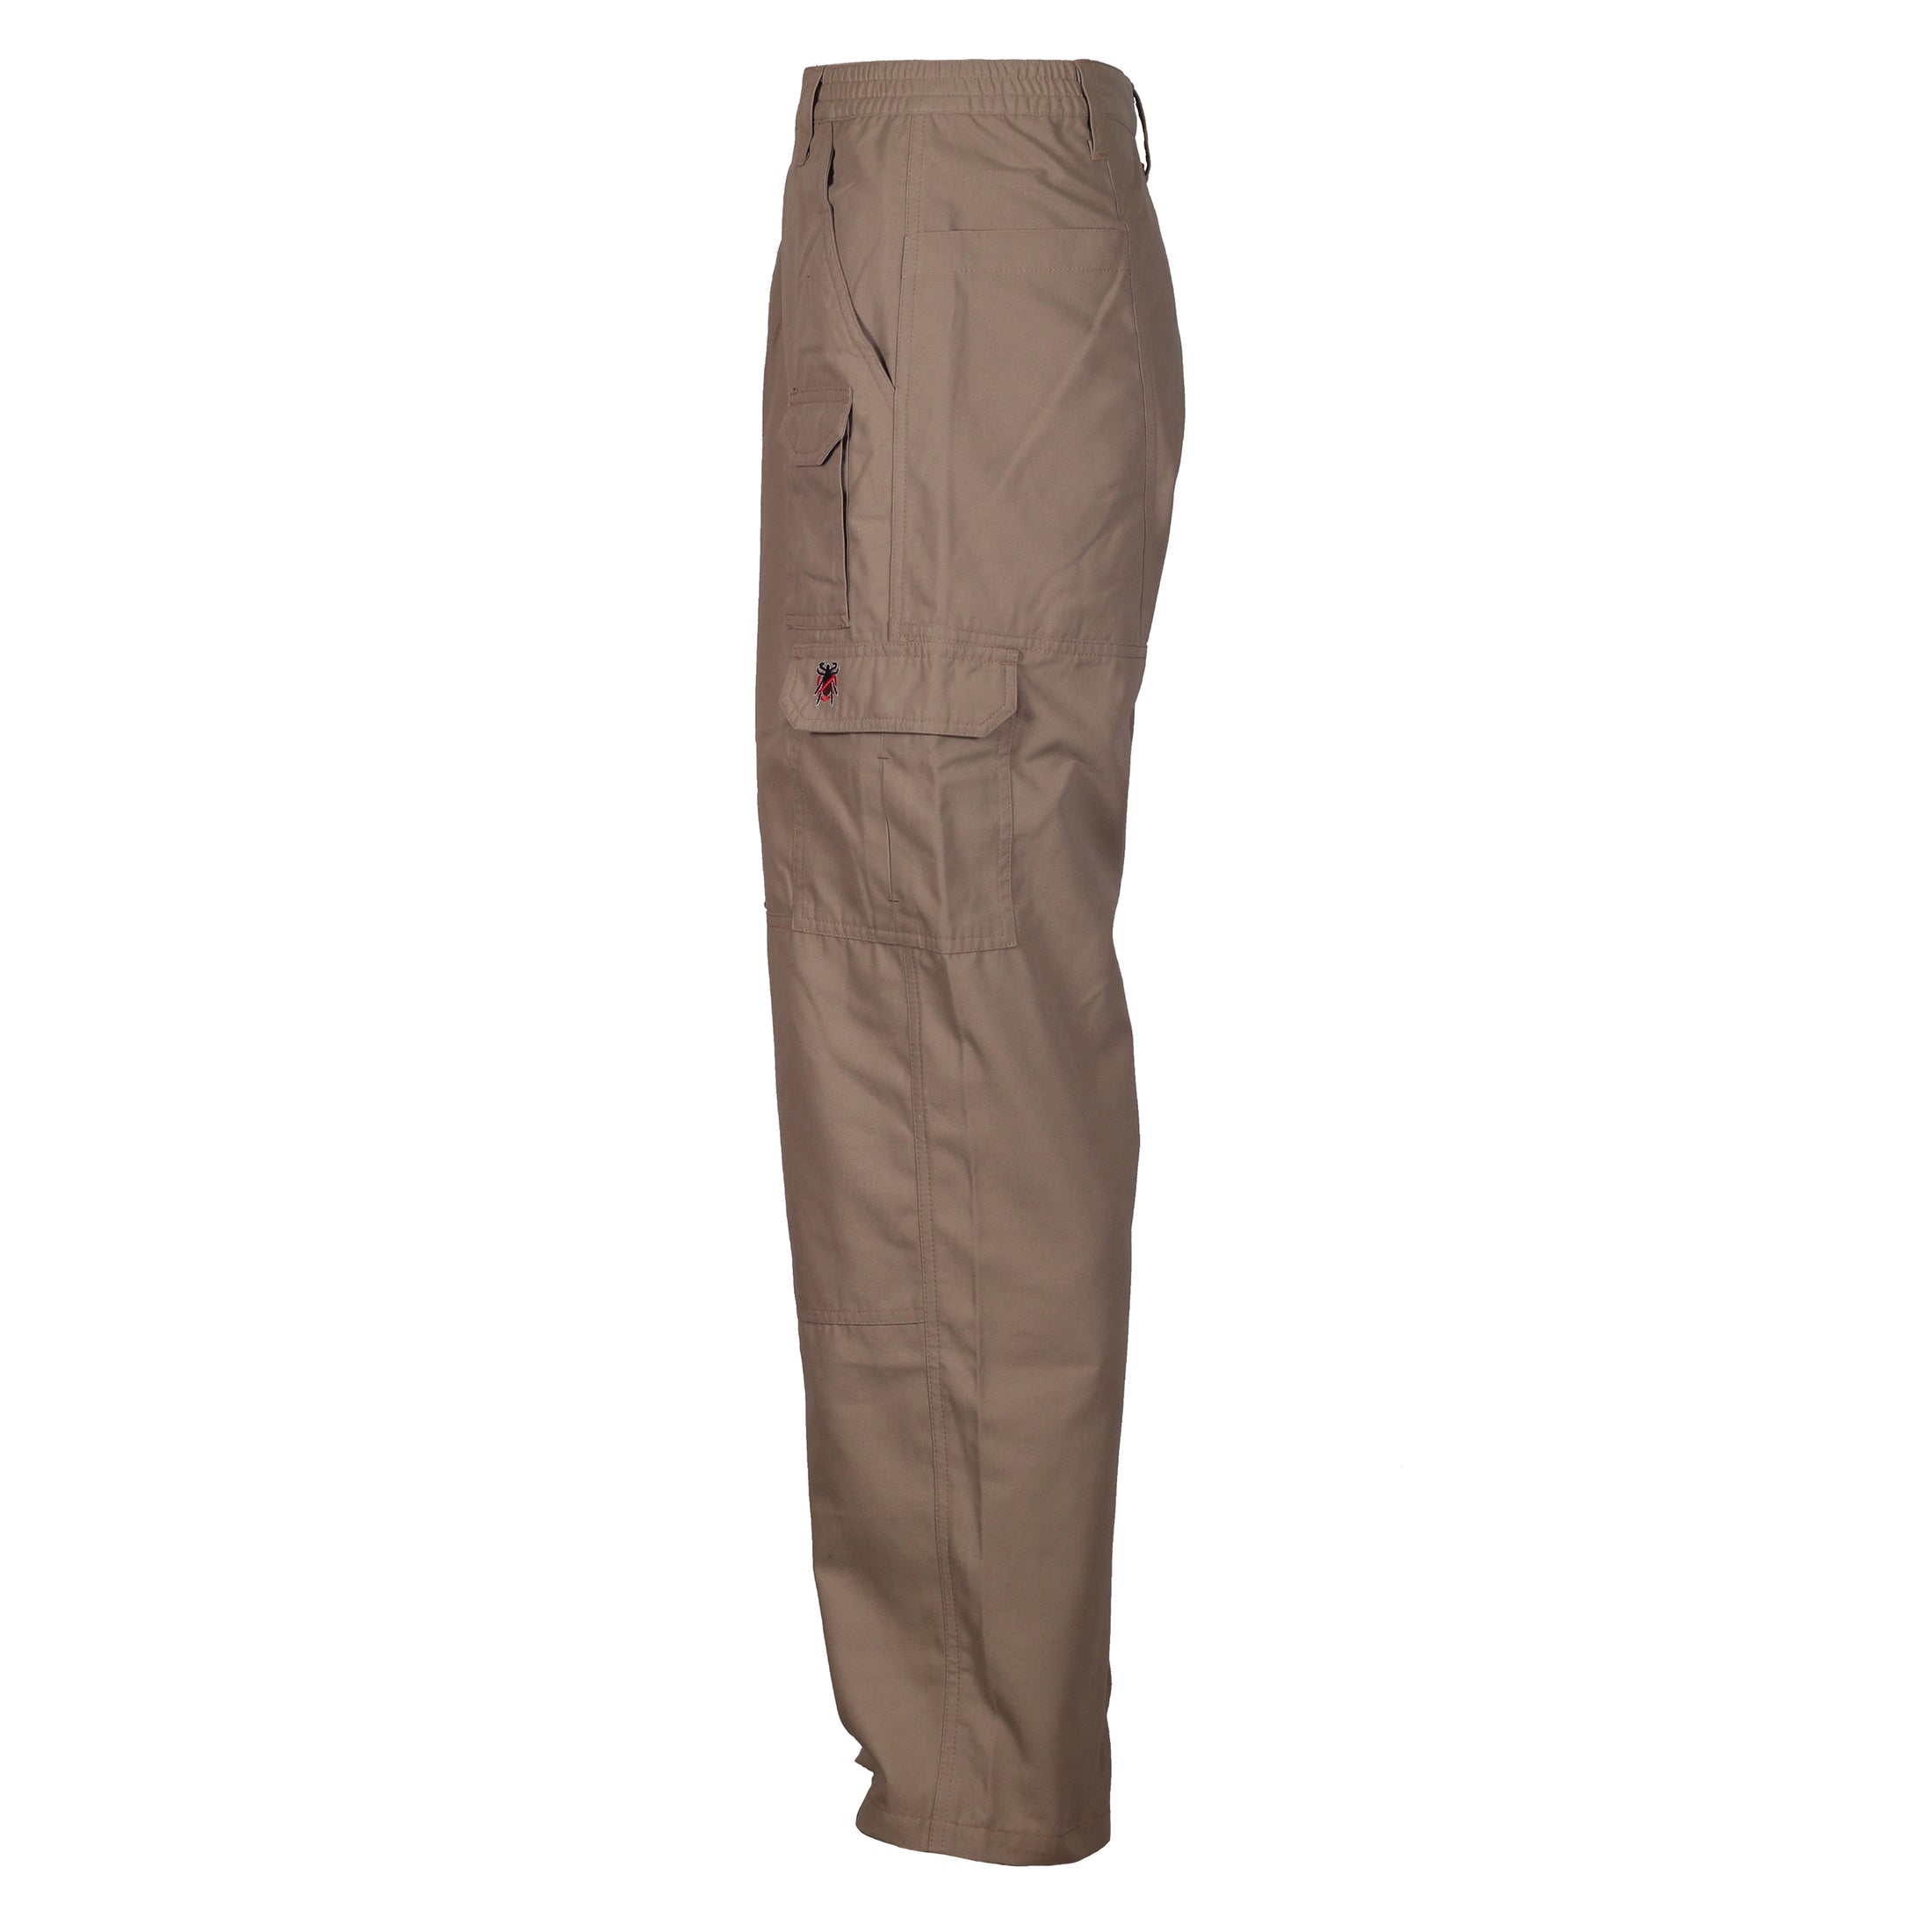 gamehide ElimiTick Tactical Style Eight Pocket Field Pant back (tan)